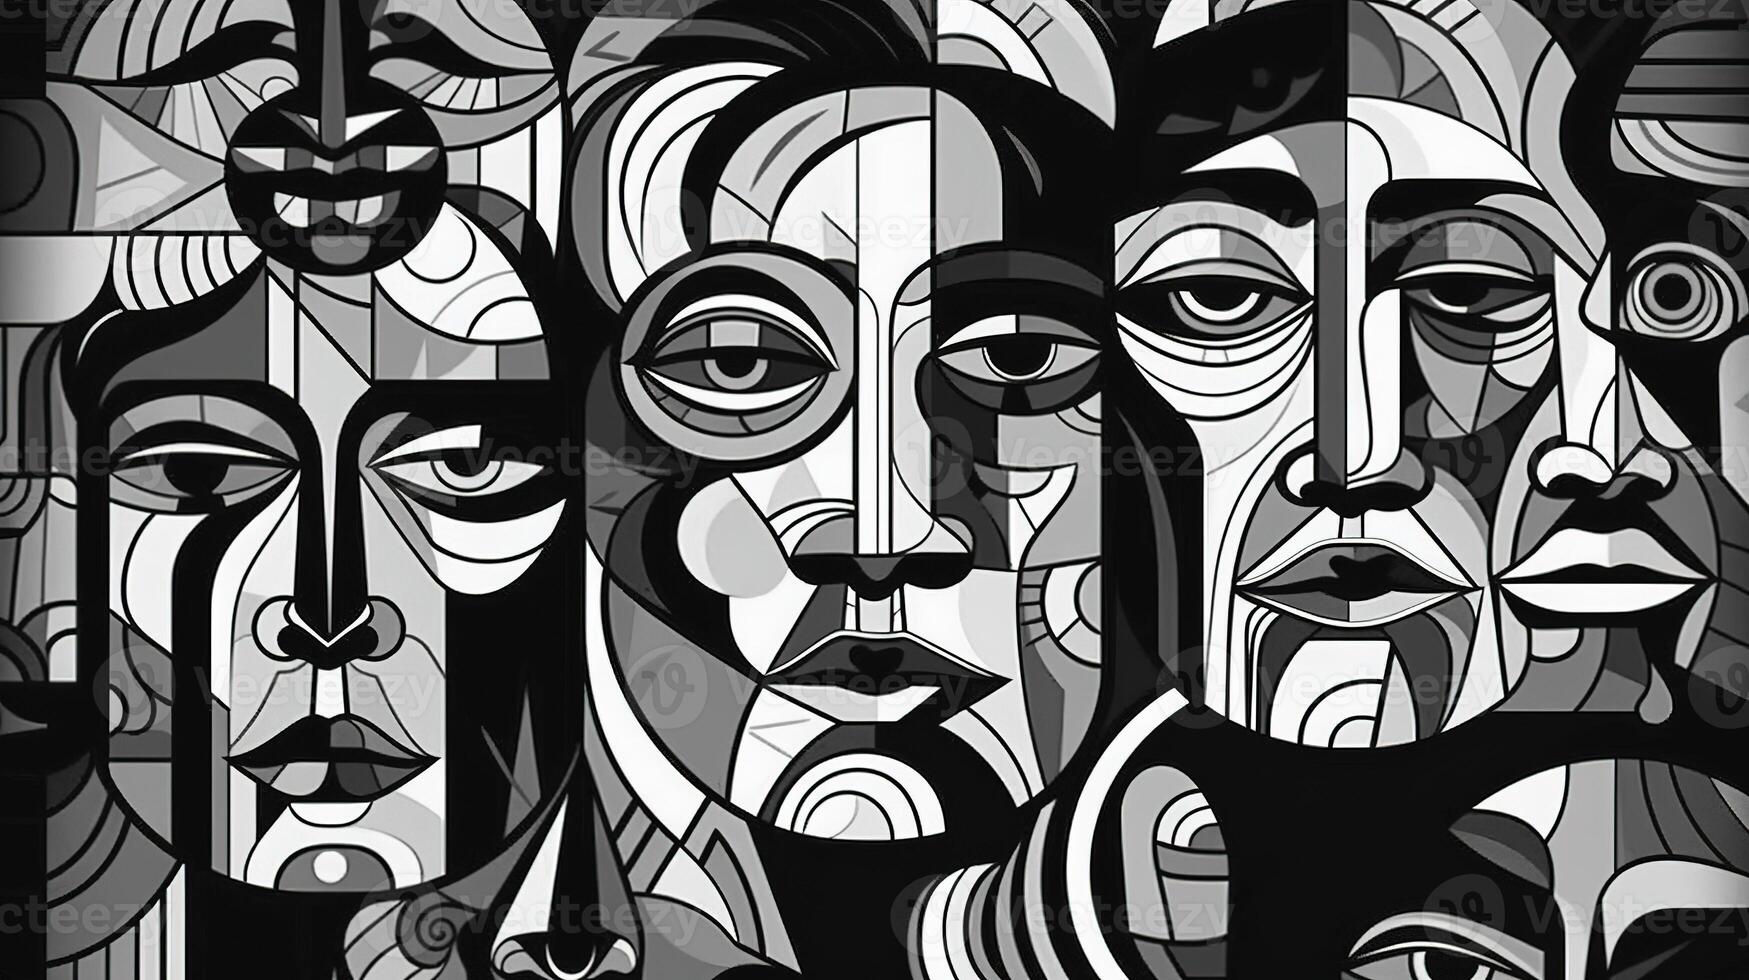 A Collage of Faces Depicting the Struggles of Psychology, Depression and Stress. photo